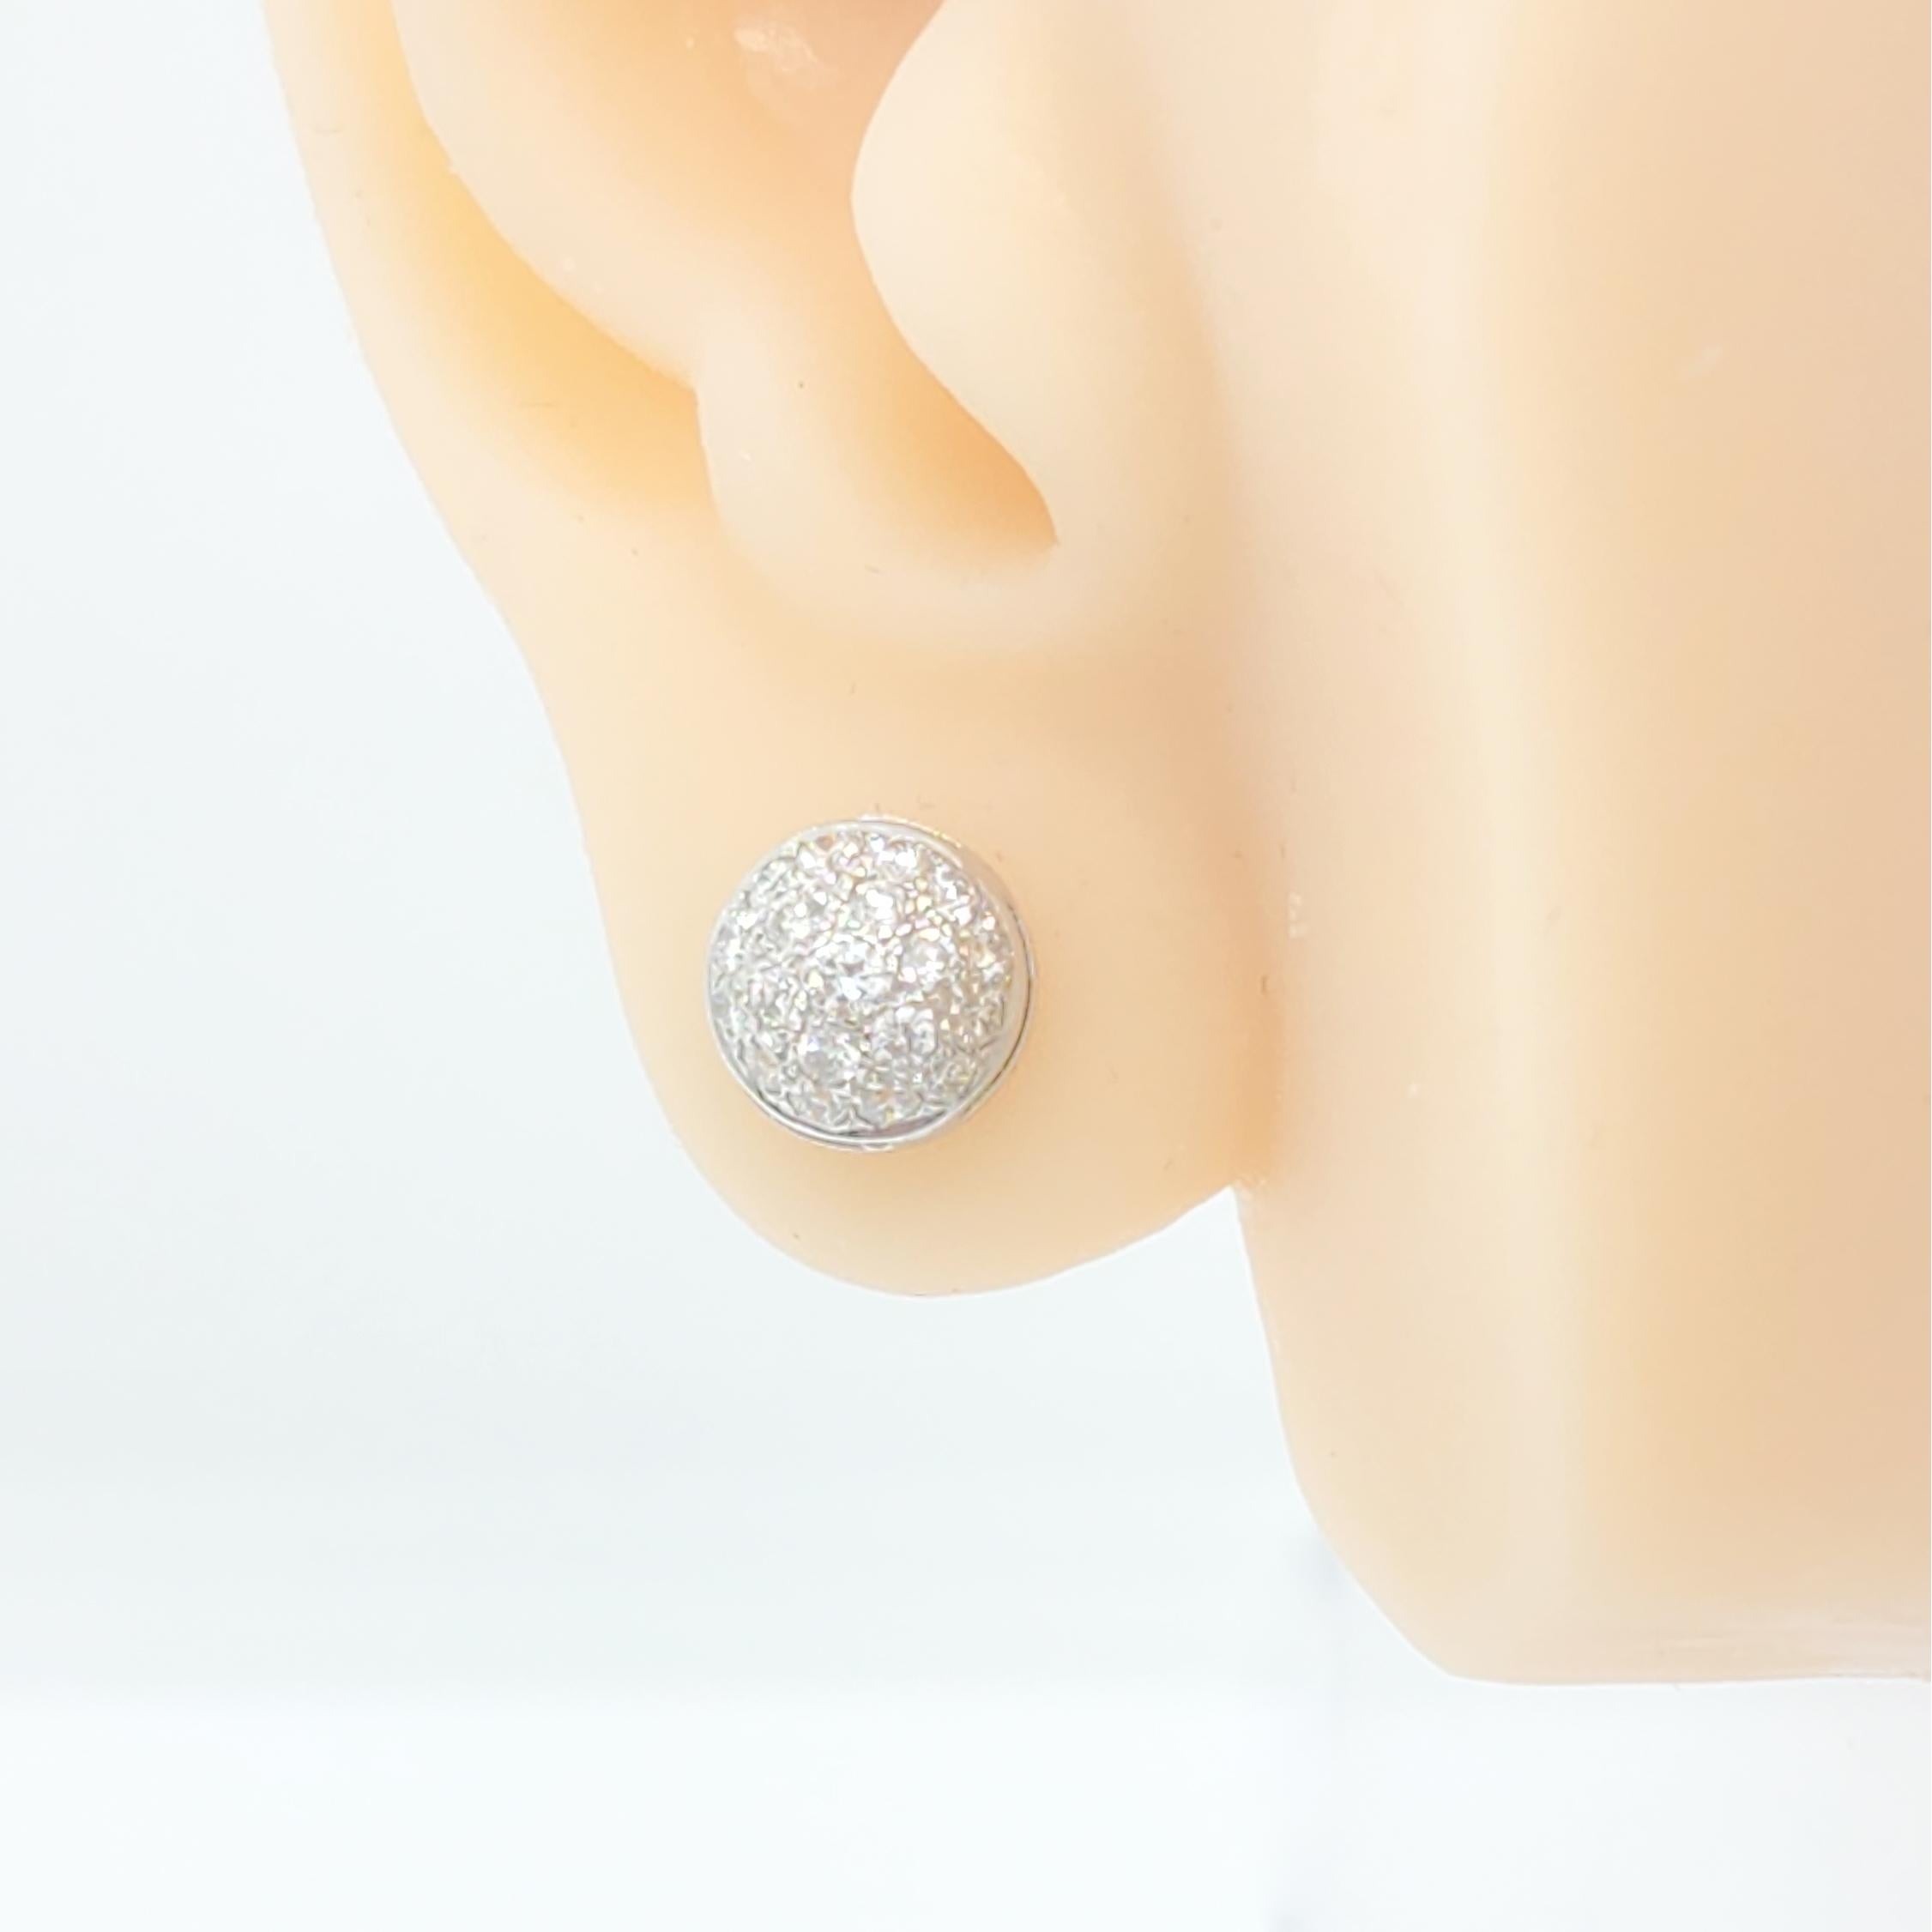 Beautiful and simple pave diamond stud earrings with 0.40 ct. good quality white diamond rounds.  Handmade in 14k white gold.  Push back setting.